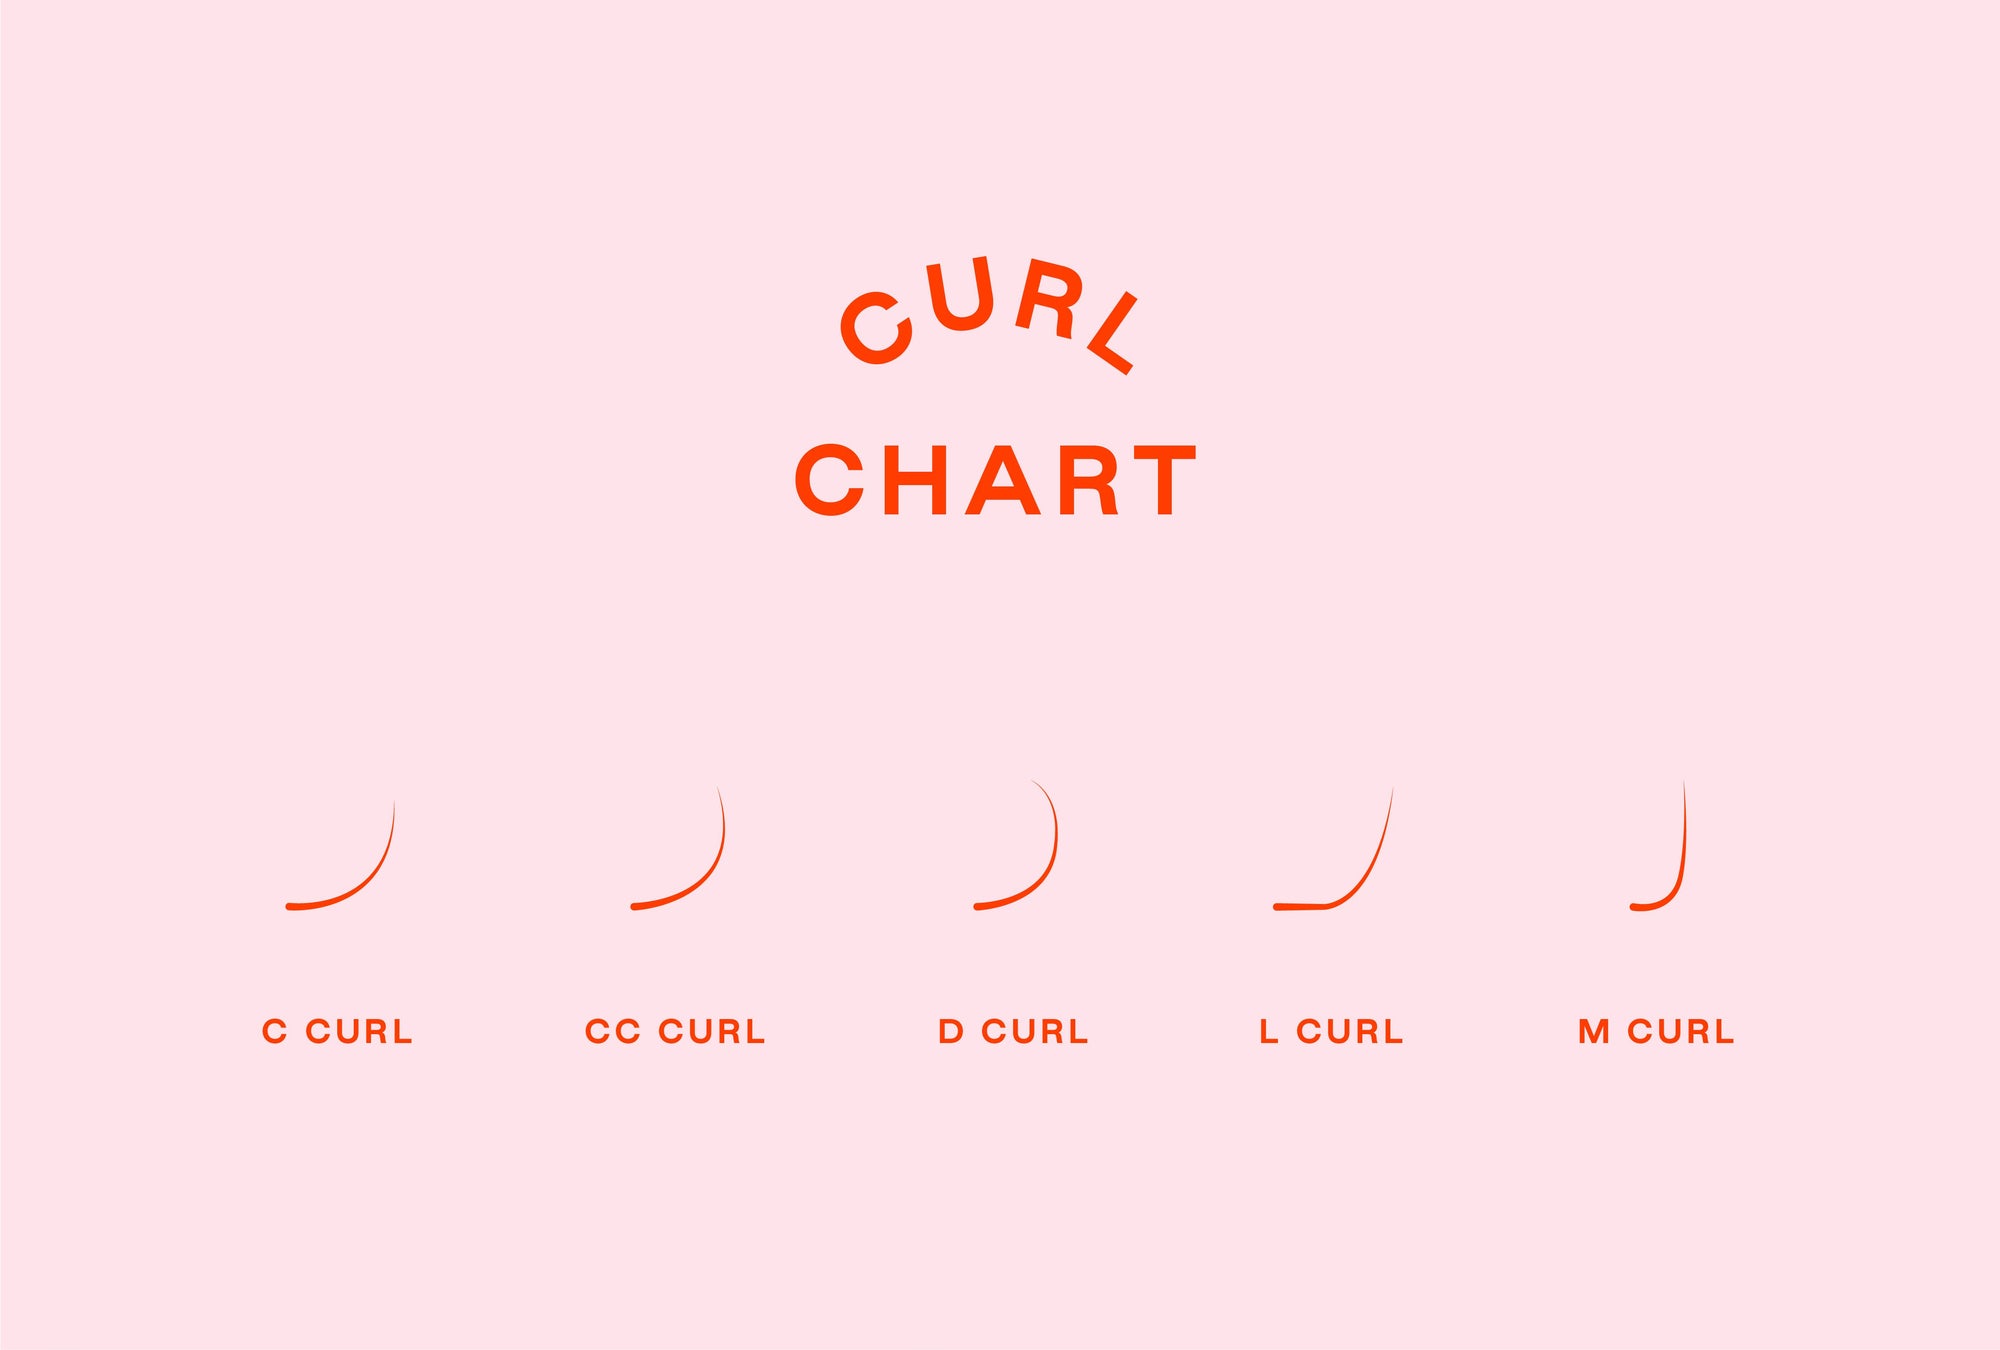 How to Choose the Right Curl for Lash Extensions